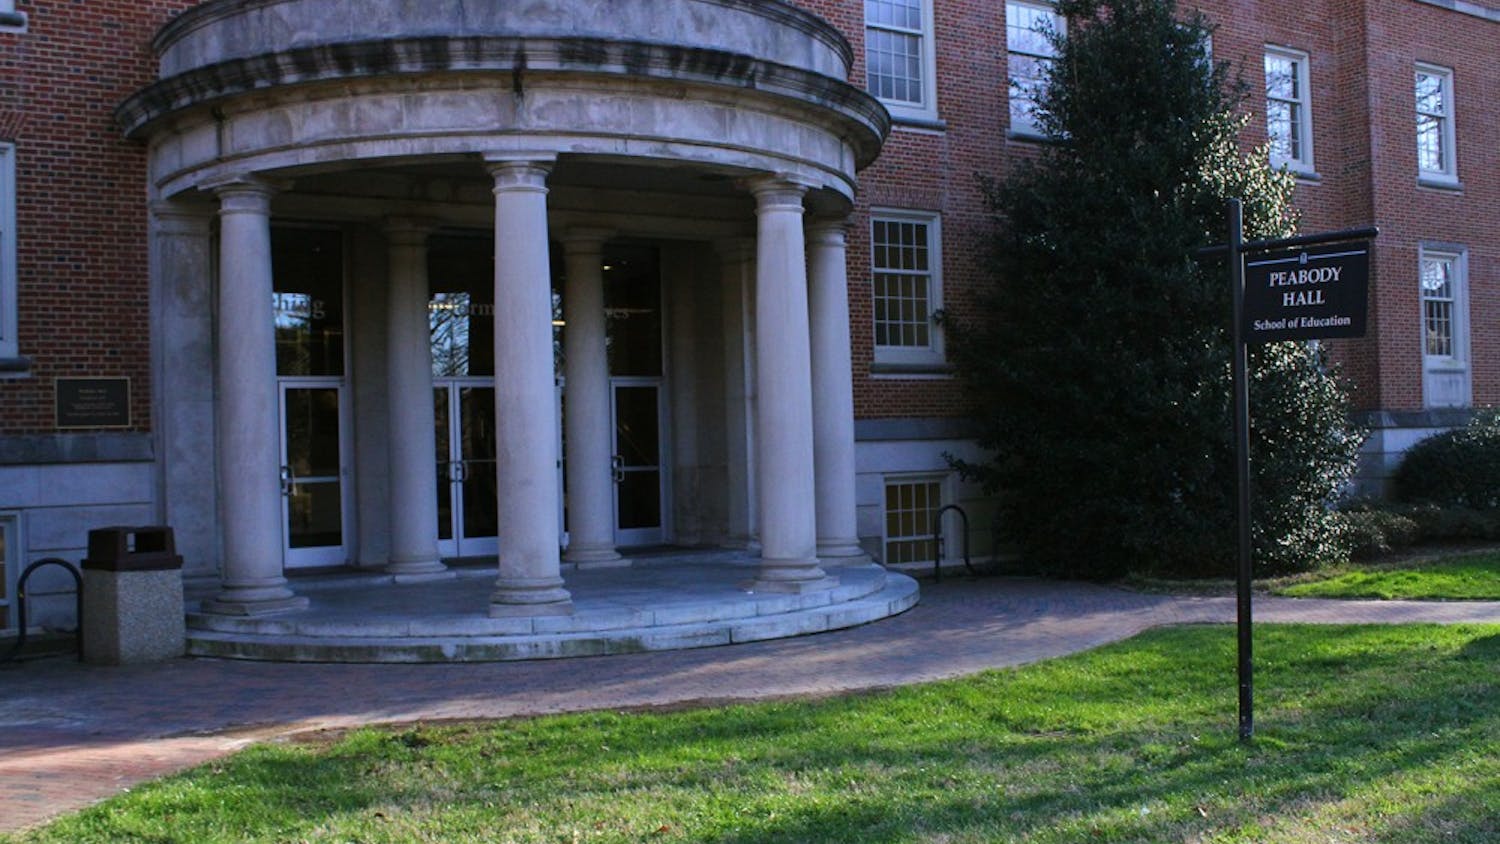 Peabody Hall houses UNC's School of Education, which is now collaborating with NC State to creating programs to license teachers.